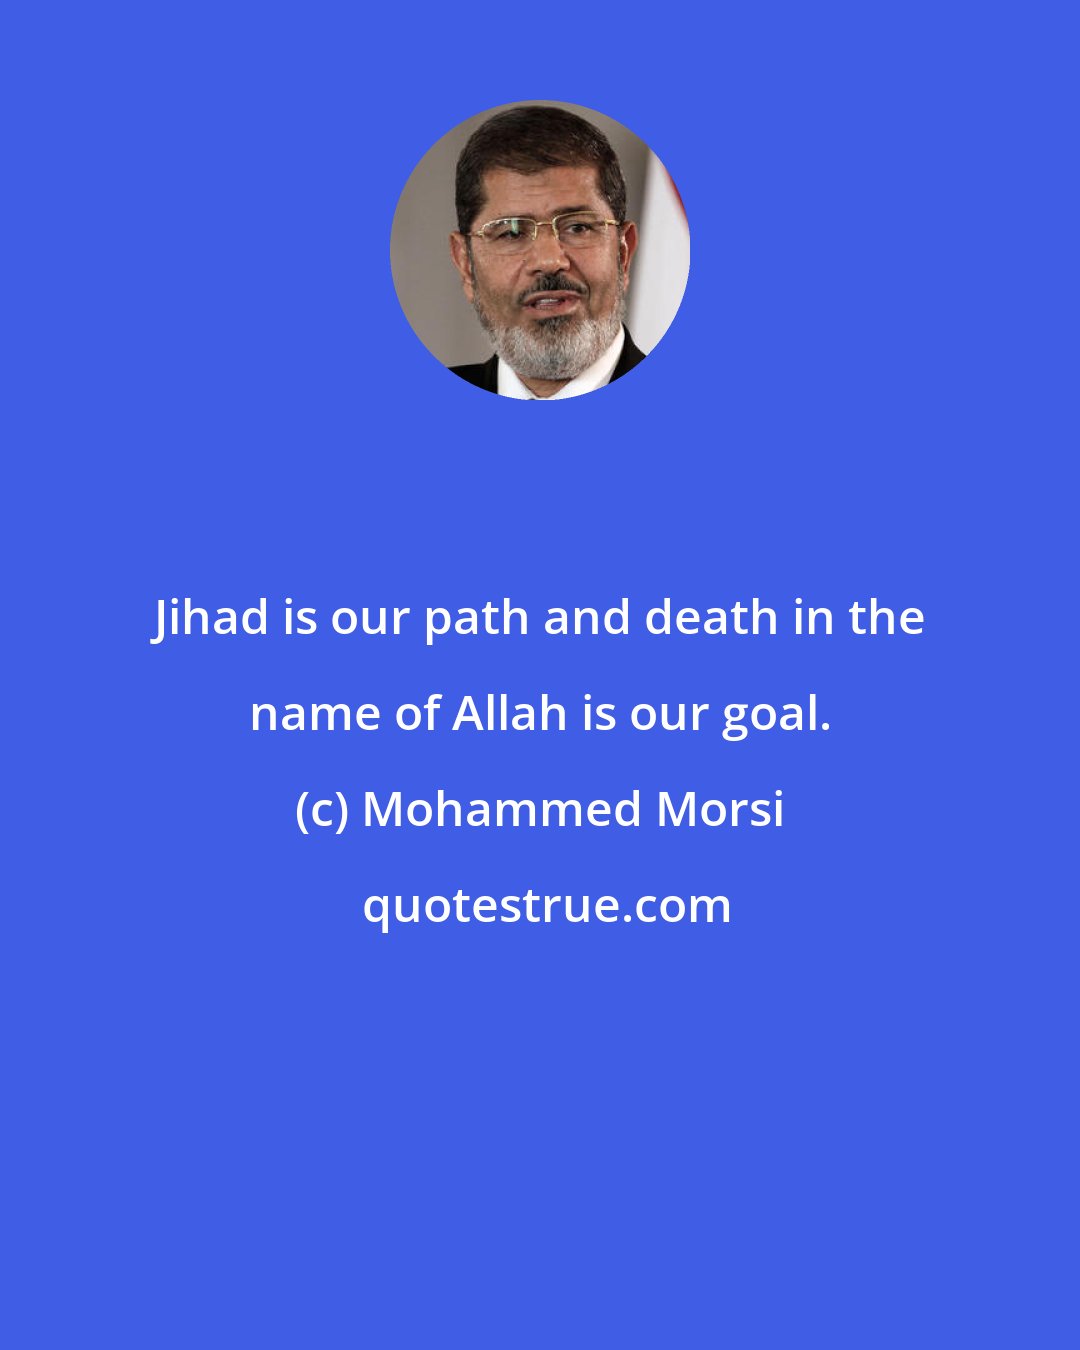 Mohammed Morsi: Jihad is our path and death in the name of Allah is our goal.